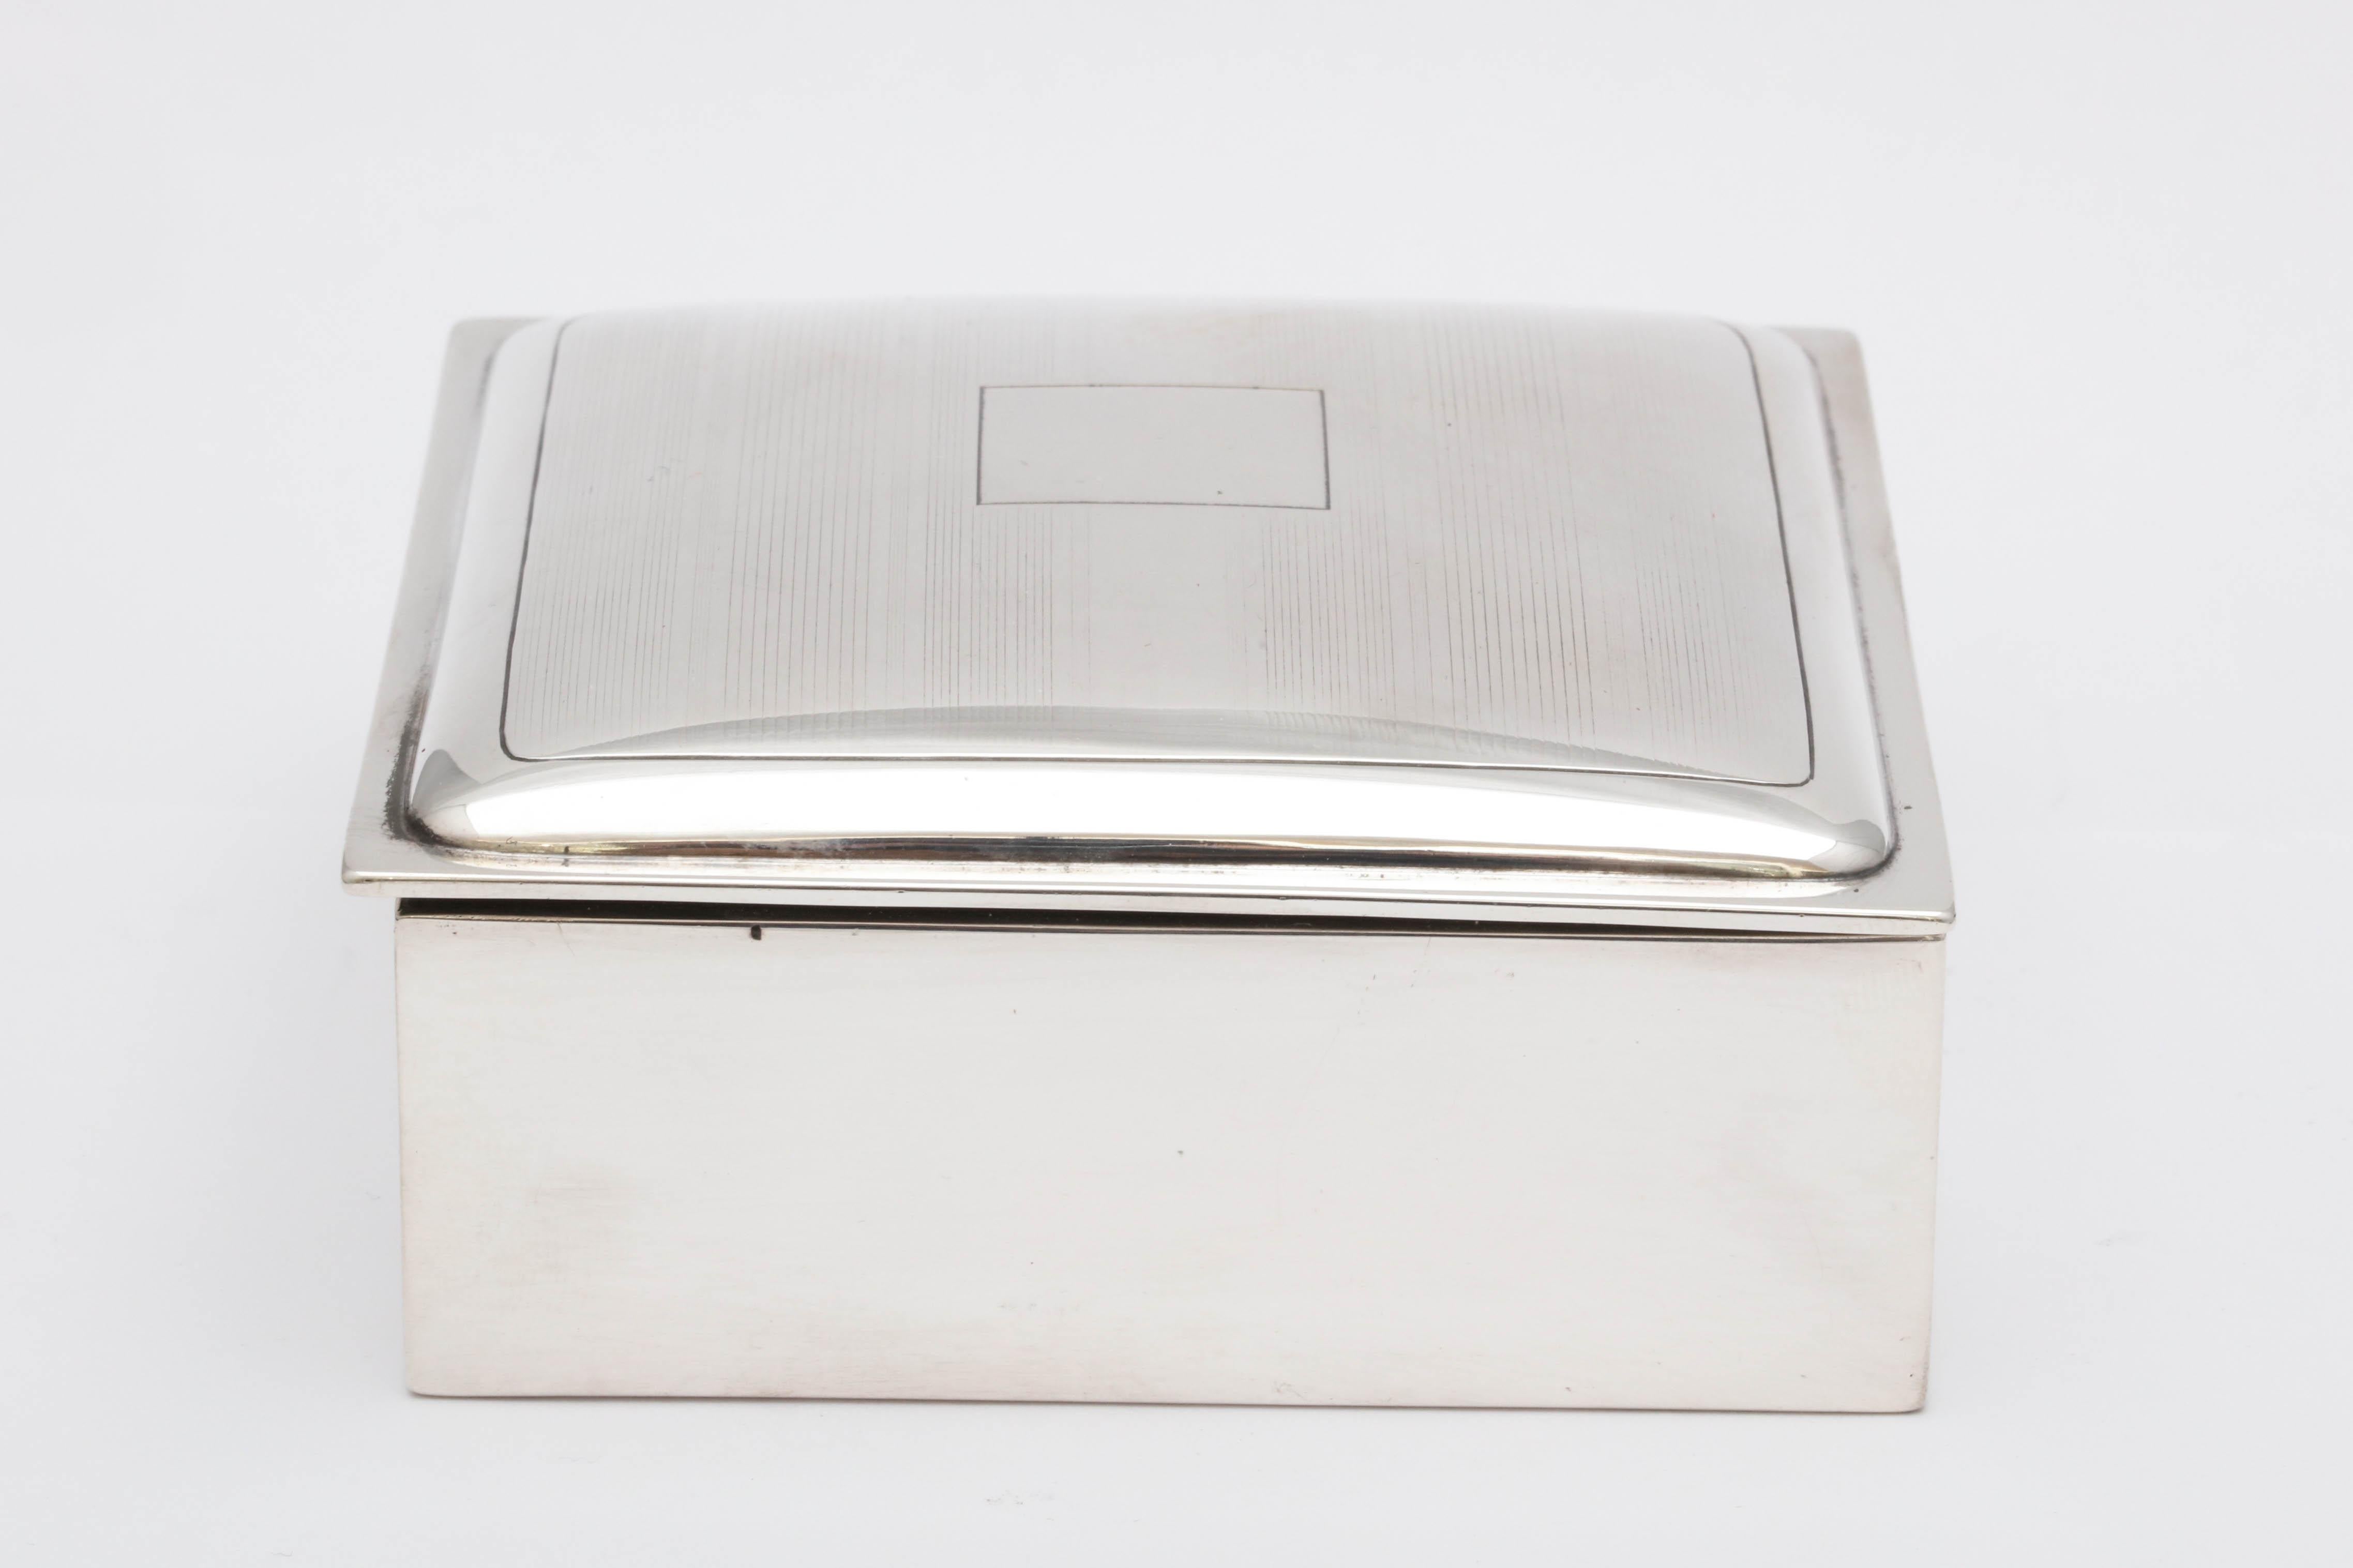 Art Deco, sterling silver, tuxedo striped table box with hinged lid, James E. Blake Co., Attleboro, Mass., circa 1910. Wood lined. Vacant cartouche. Underside of lid is gilded. Box is wood lined. Measures: 3 3/4 inches wide x 3 3/4 inches deep x 1